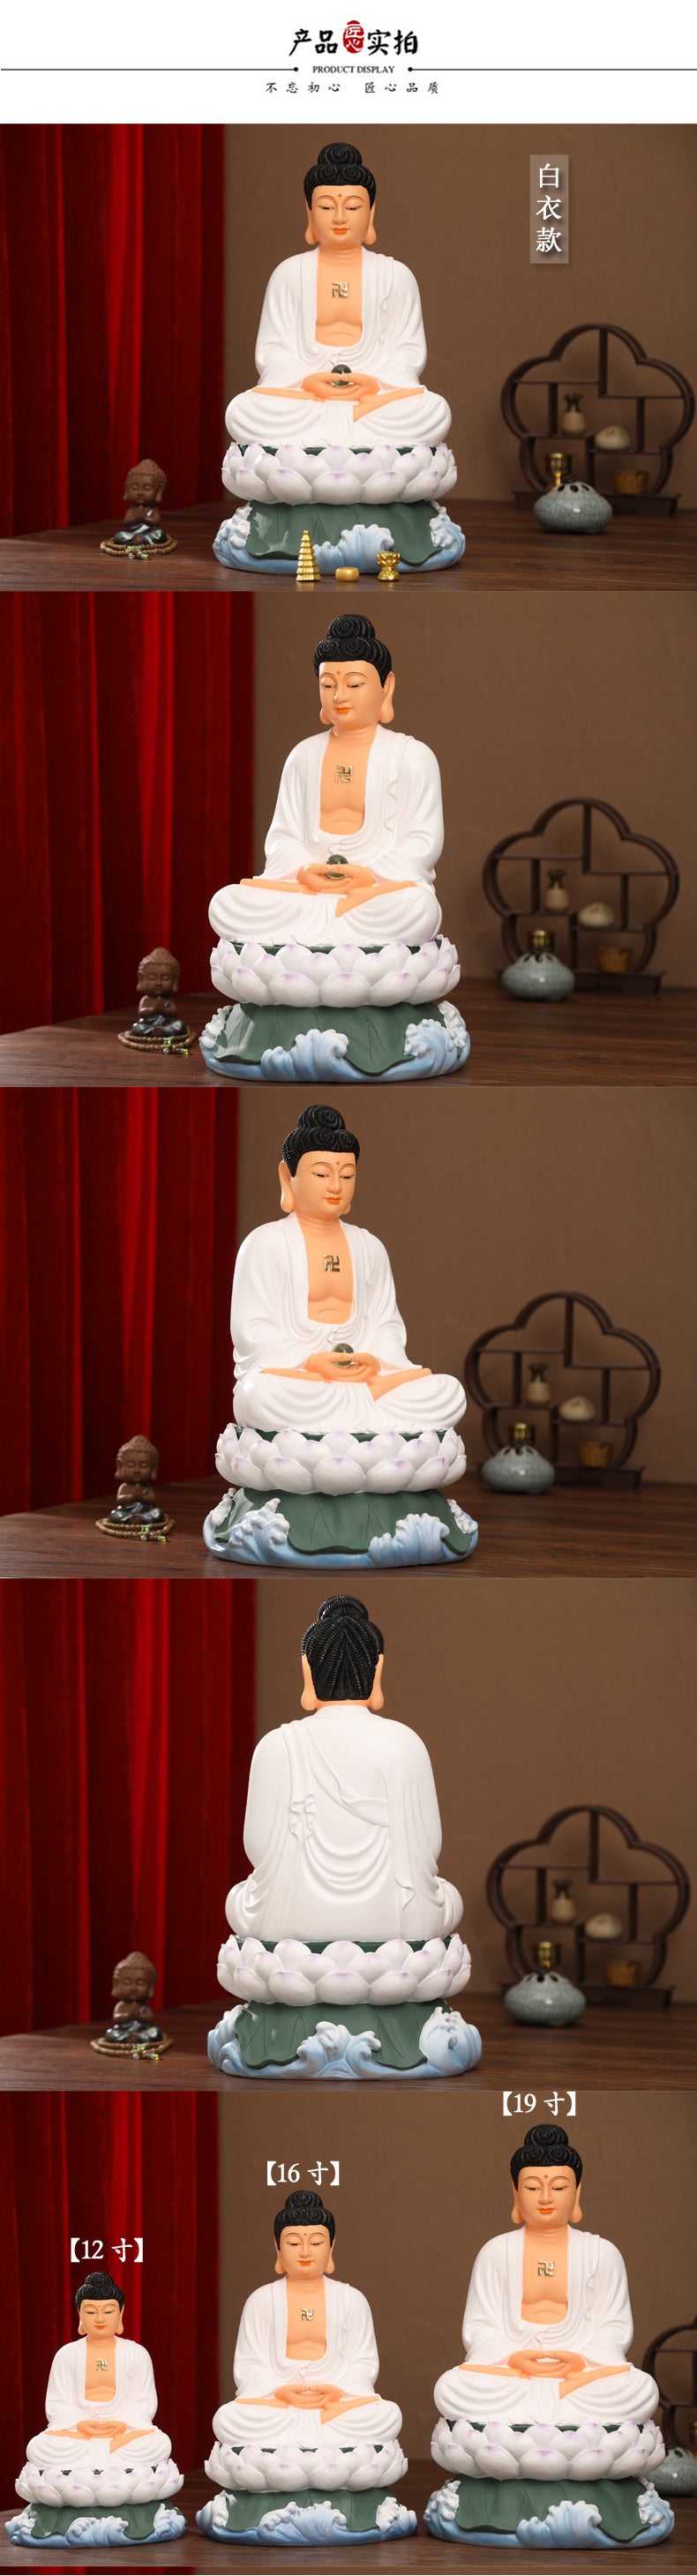 Mahāvairocana, White Clothes Shakyamuni Buddha Statues for Sale, Lotus Leaf Resin Material, Offerings Product Detail Description-3